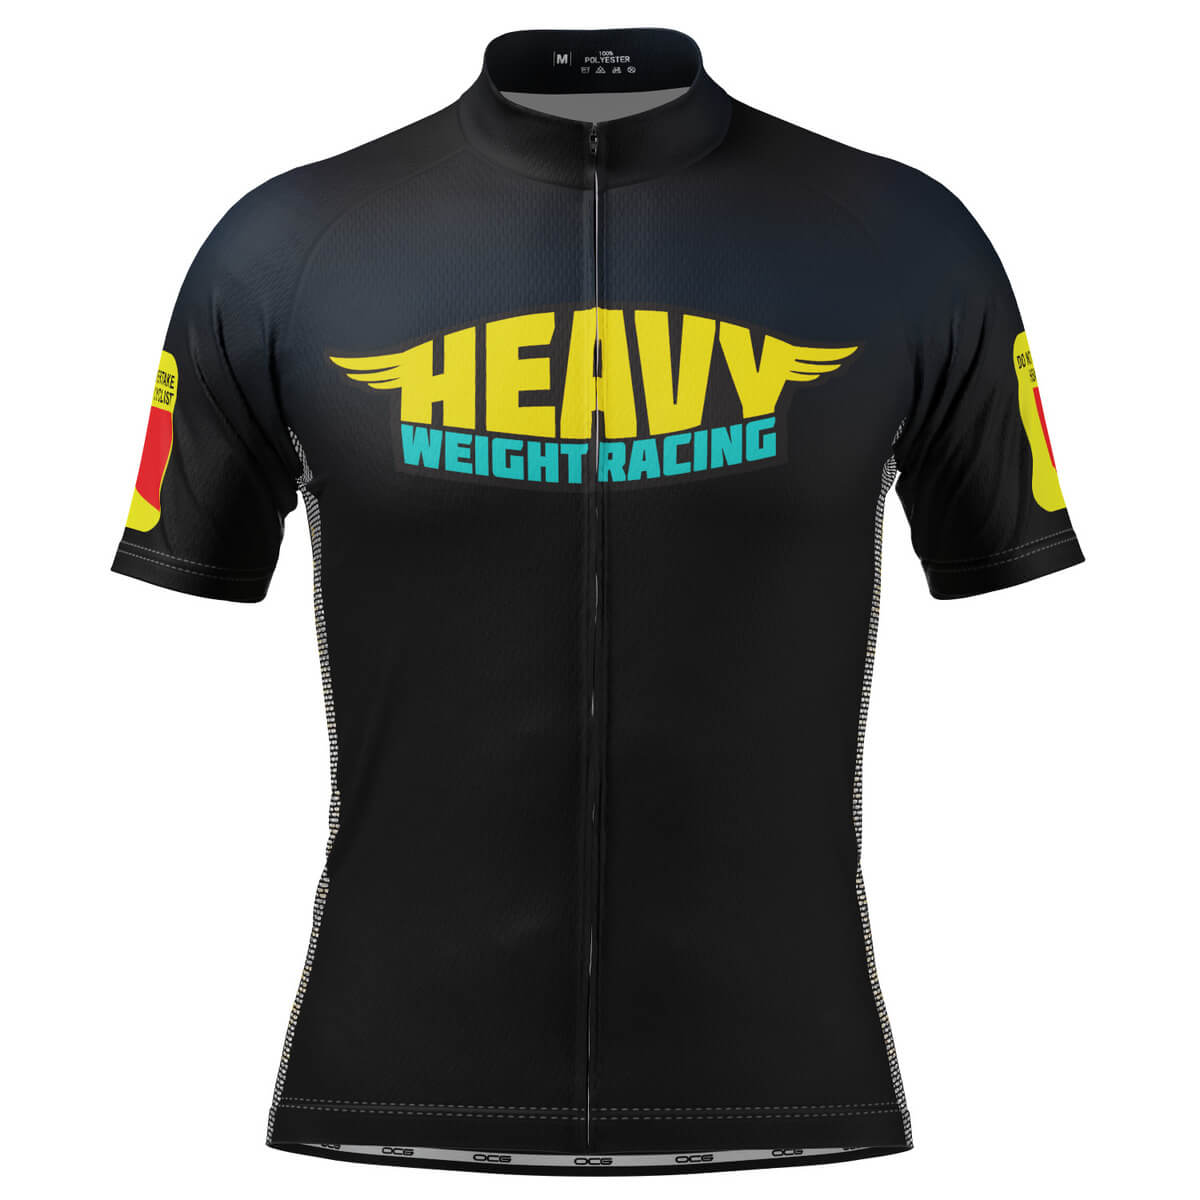 Men's Heavy Weight Racing Gravity Series 1 Short Sleeve Cycling Jersey